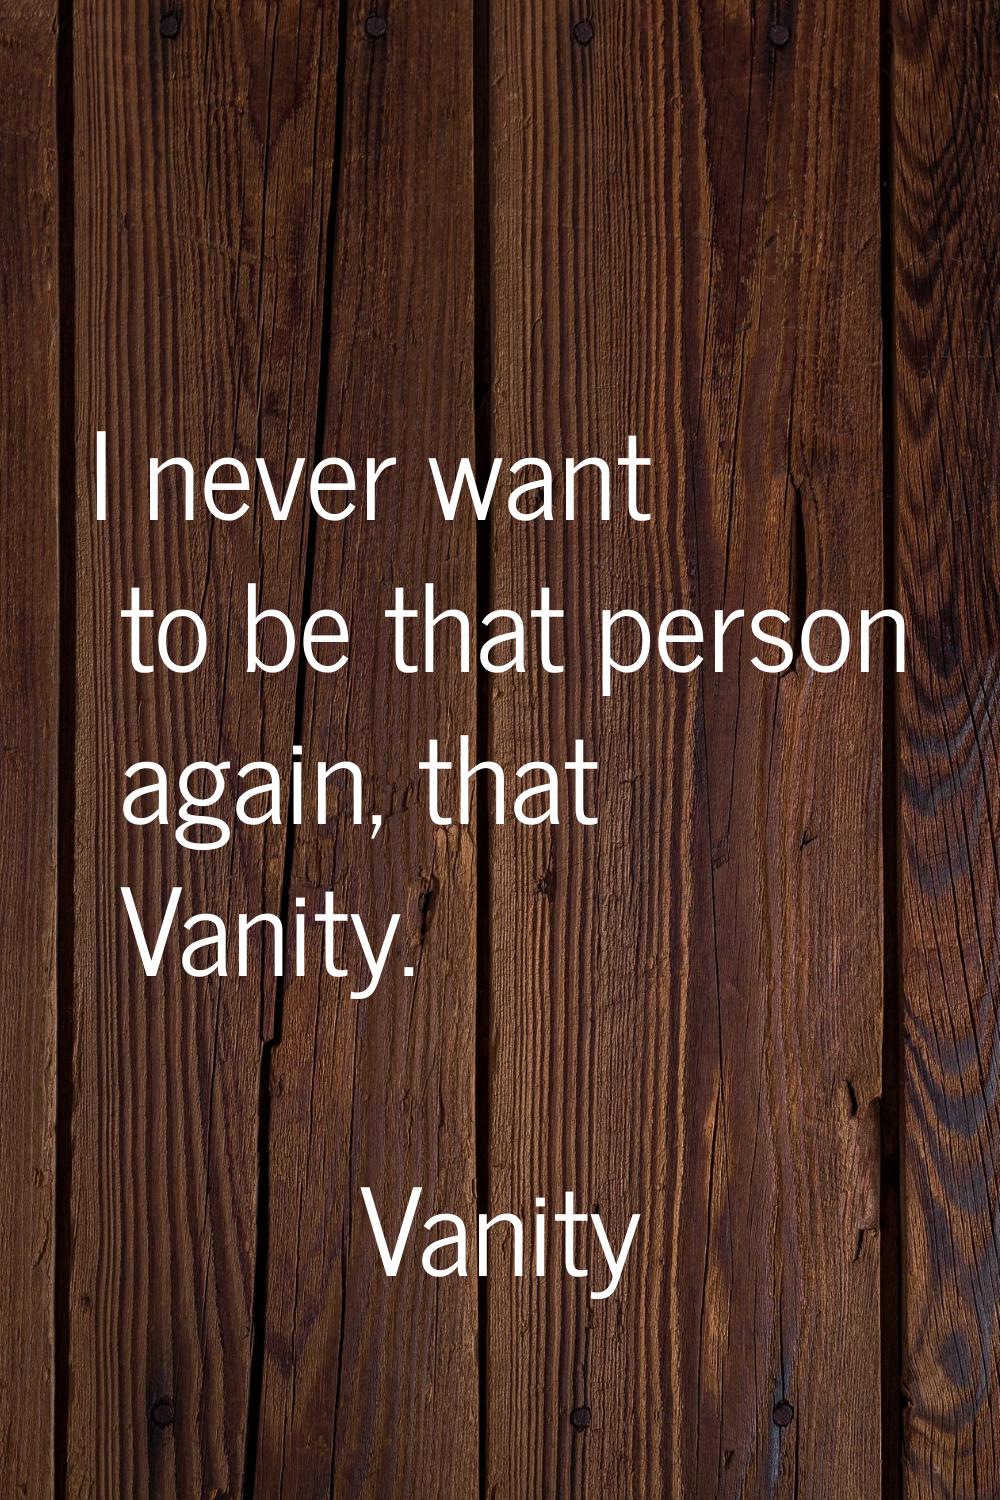 I never want to be that person again, that Vanity.